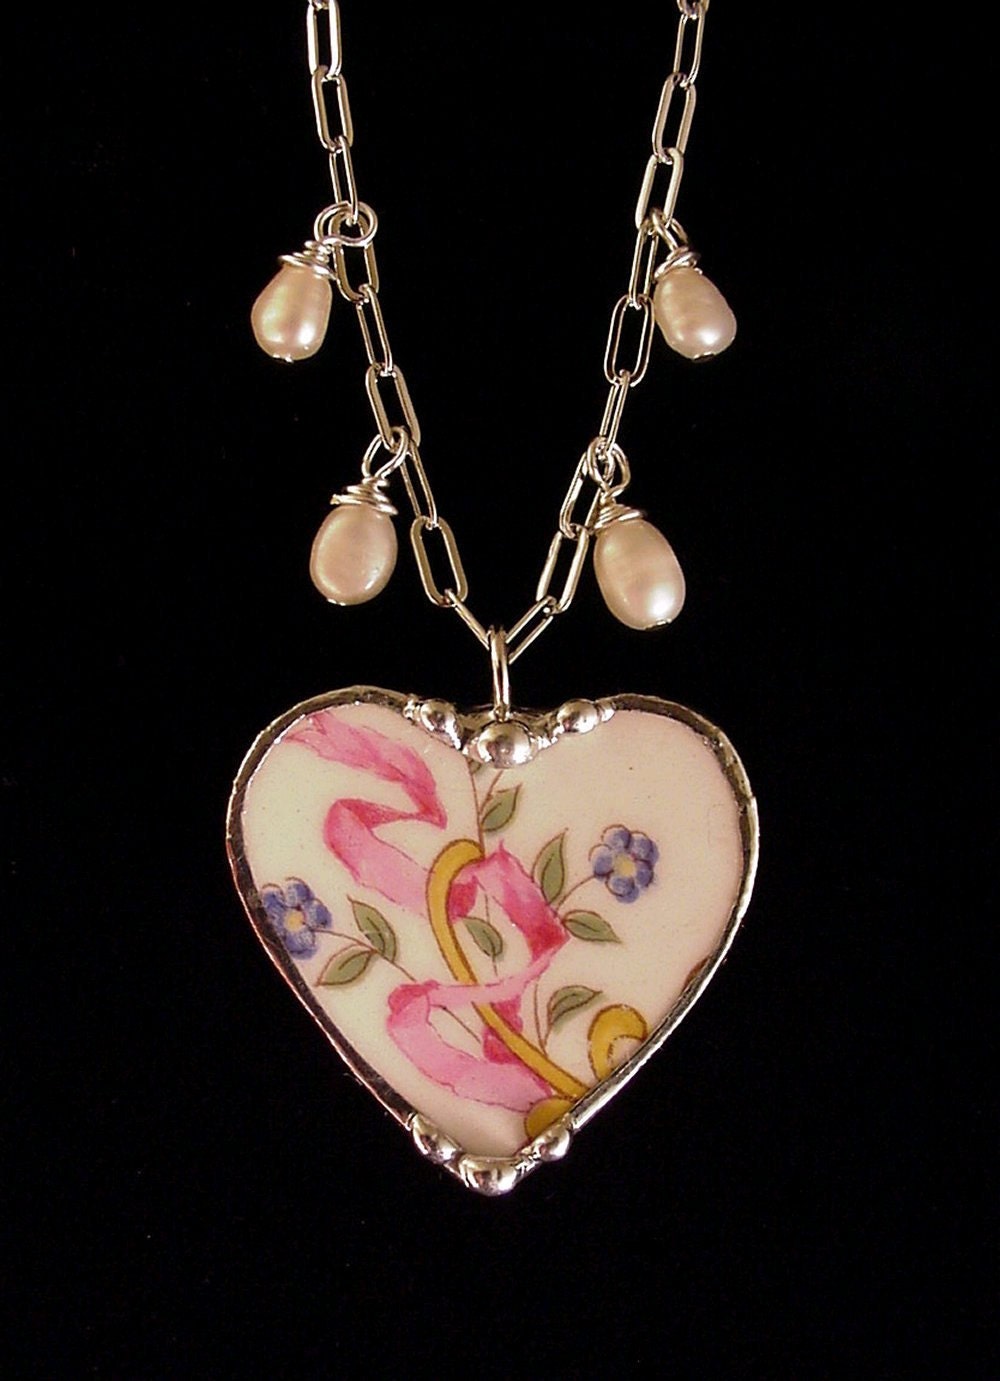 Broken China Jewelry heart pendant necklace forget me nots, pink ribbon, pearls